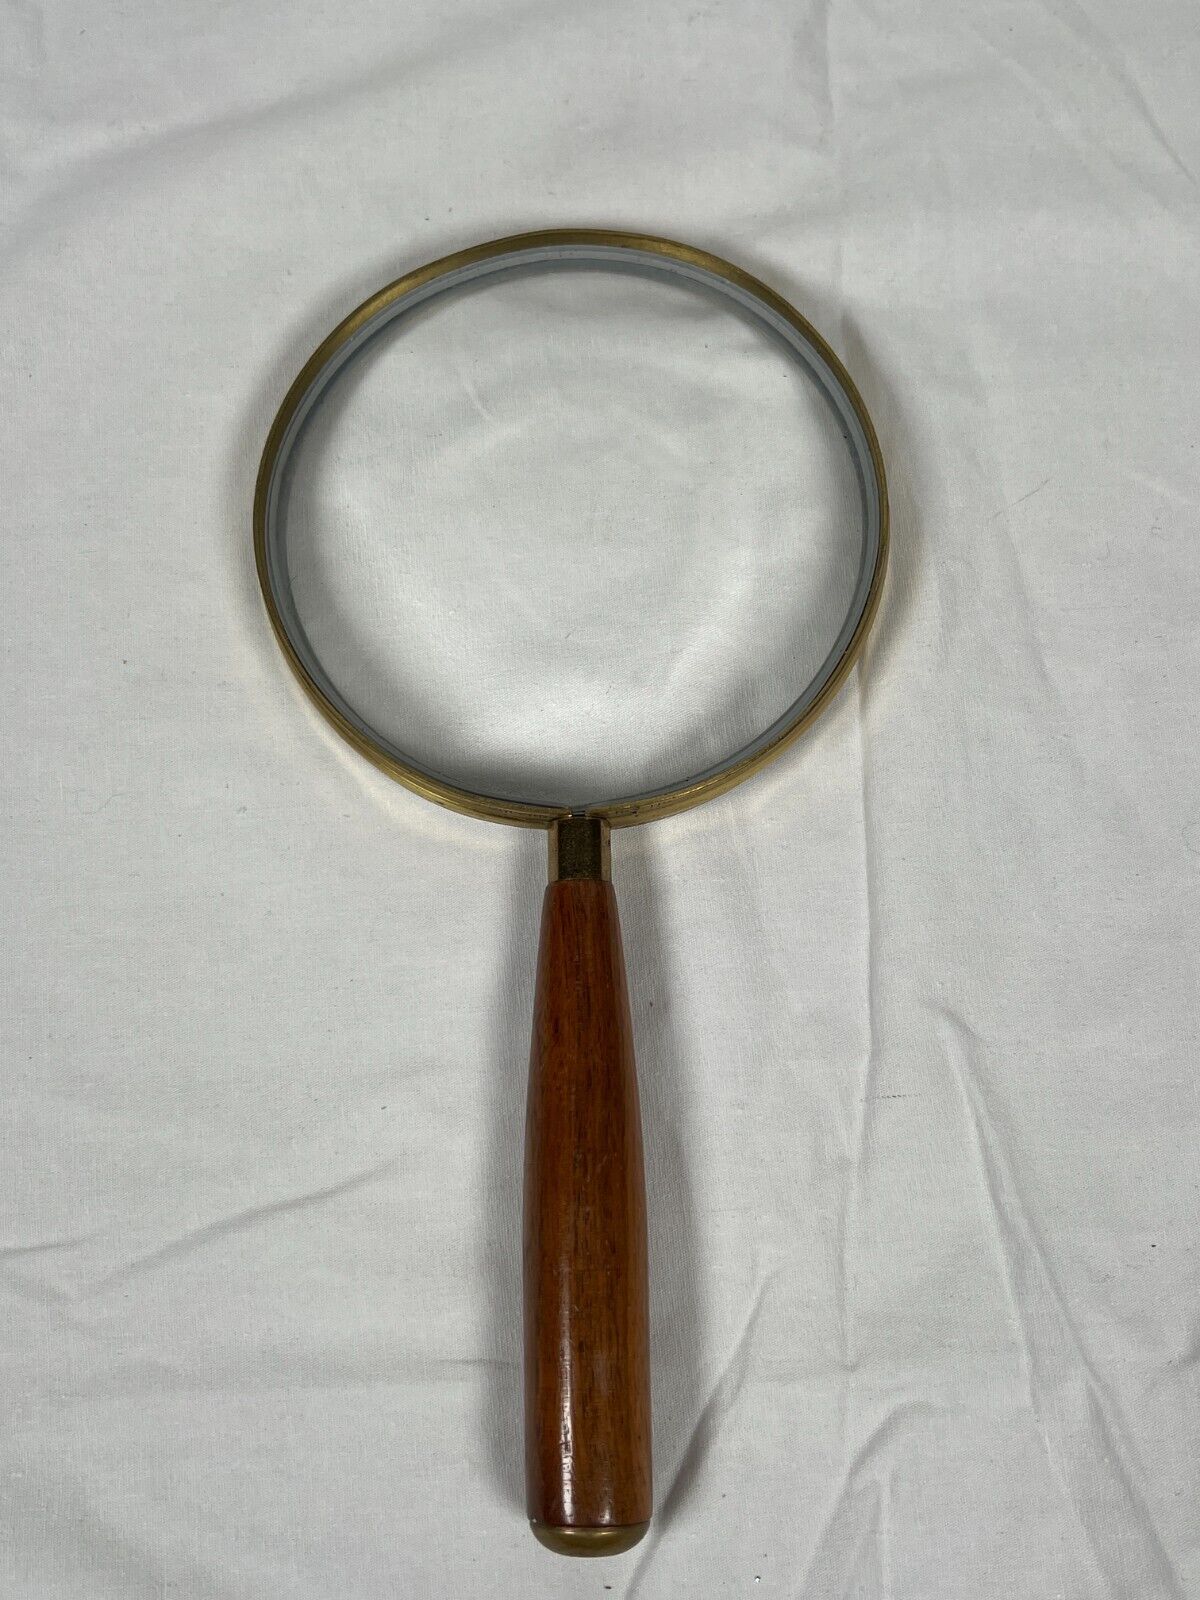 Vintage Donegan Optical Magnifying Glass Round Brass+Wood Deluxe Reader Large 5”